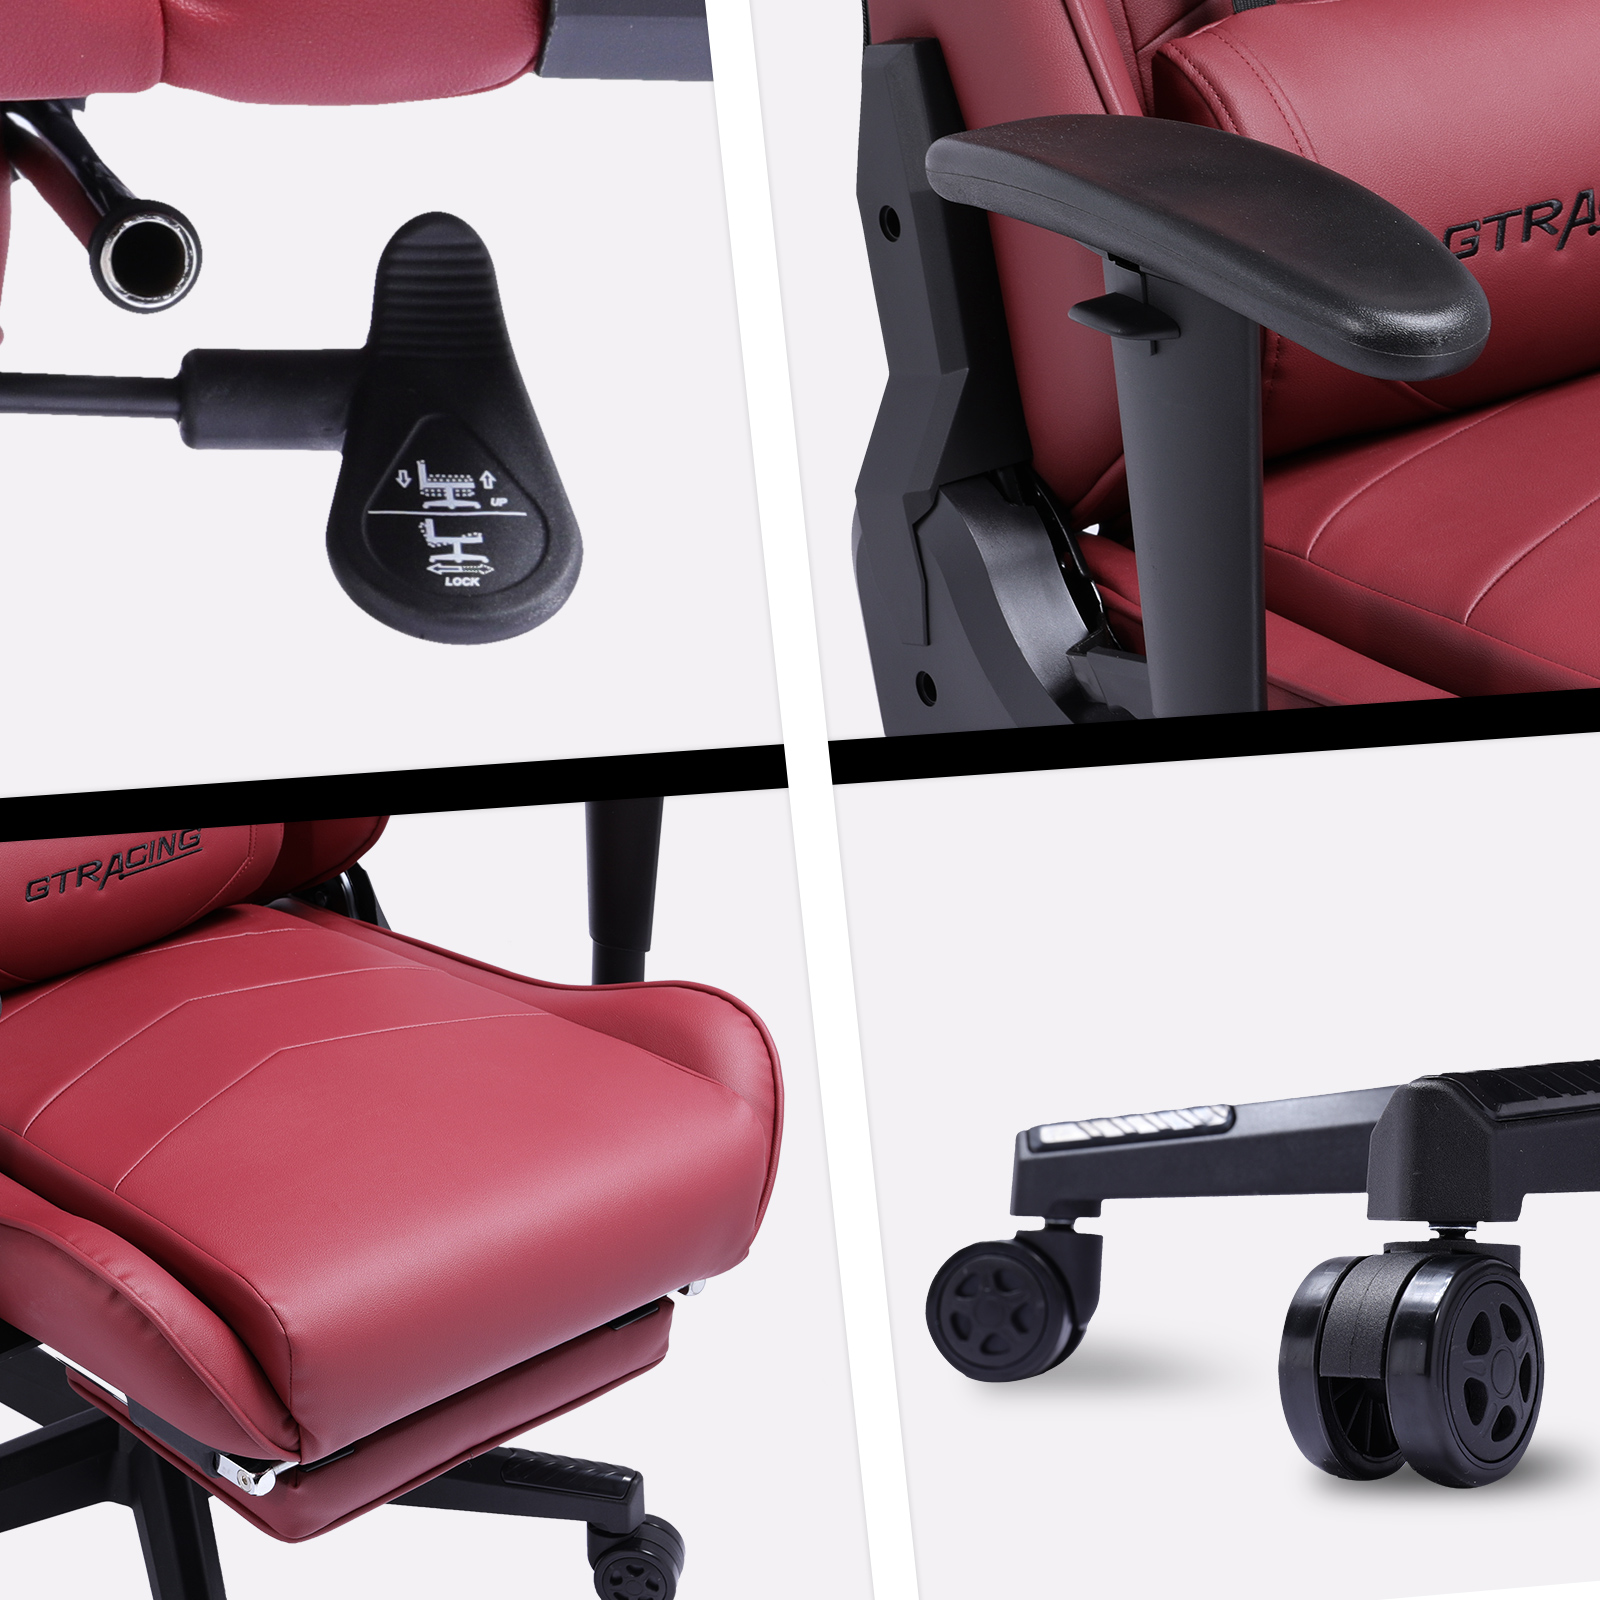 GTRACING Gaming Chair with Footrest Ergonomic Reclining Leather Chair, Dark Red - image 3 of 6